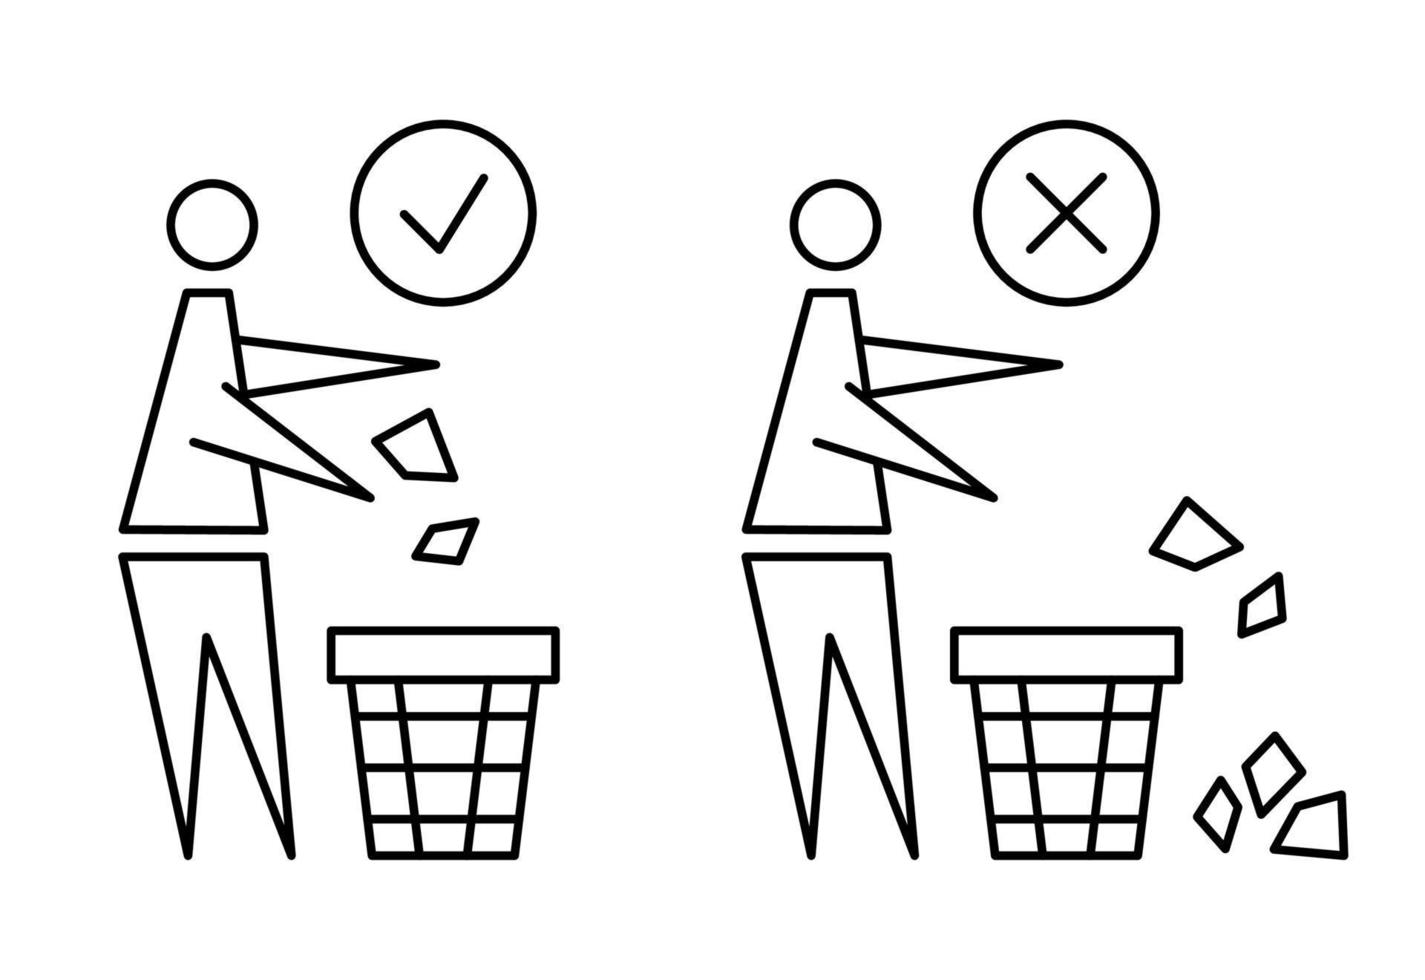 Keeping the clean. Forbidden icon. Pitch in put trash in its place. Tidy man, do not litter, icon. Please do not throw rubbish. Do not litter, place rubbish in bins provided. Editable stroke vector